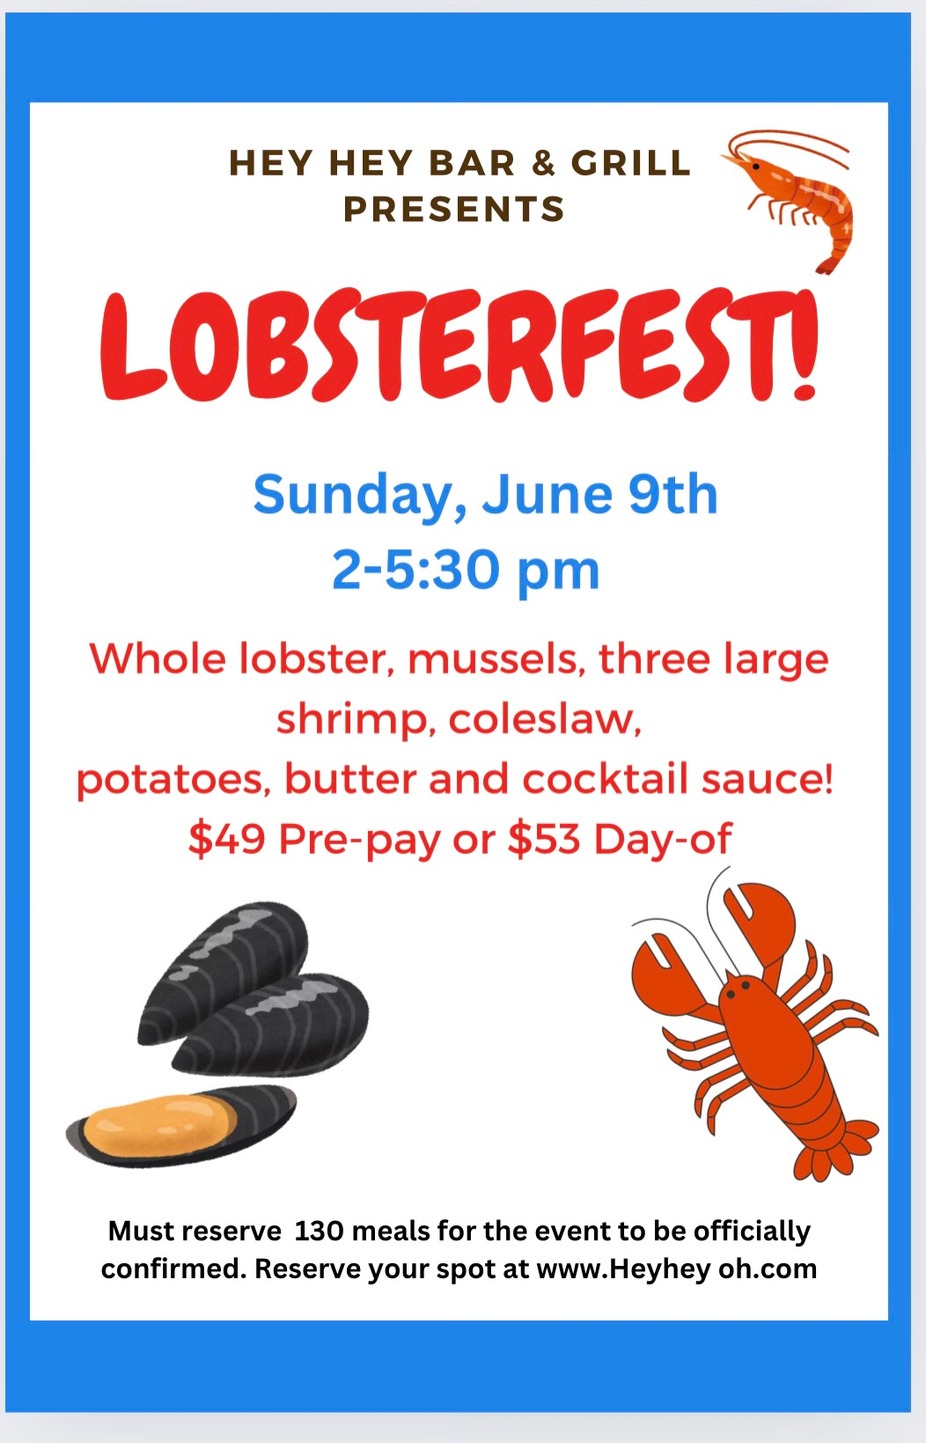 Lobsterfest event photo